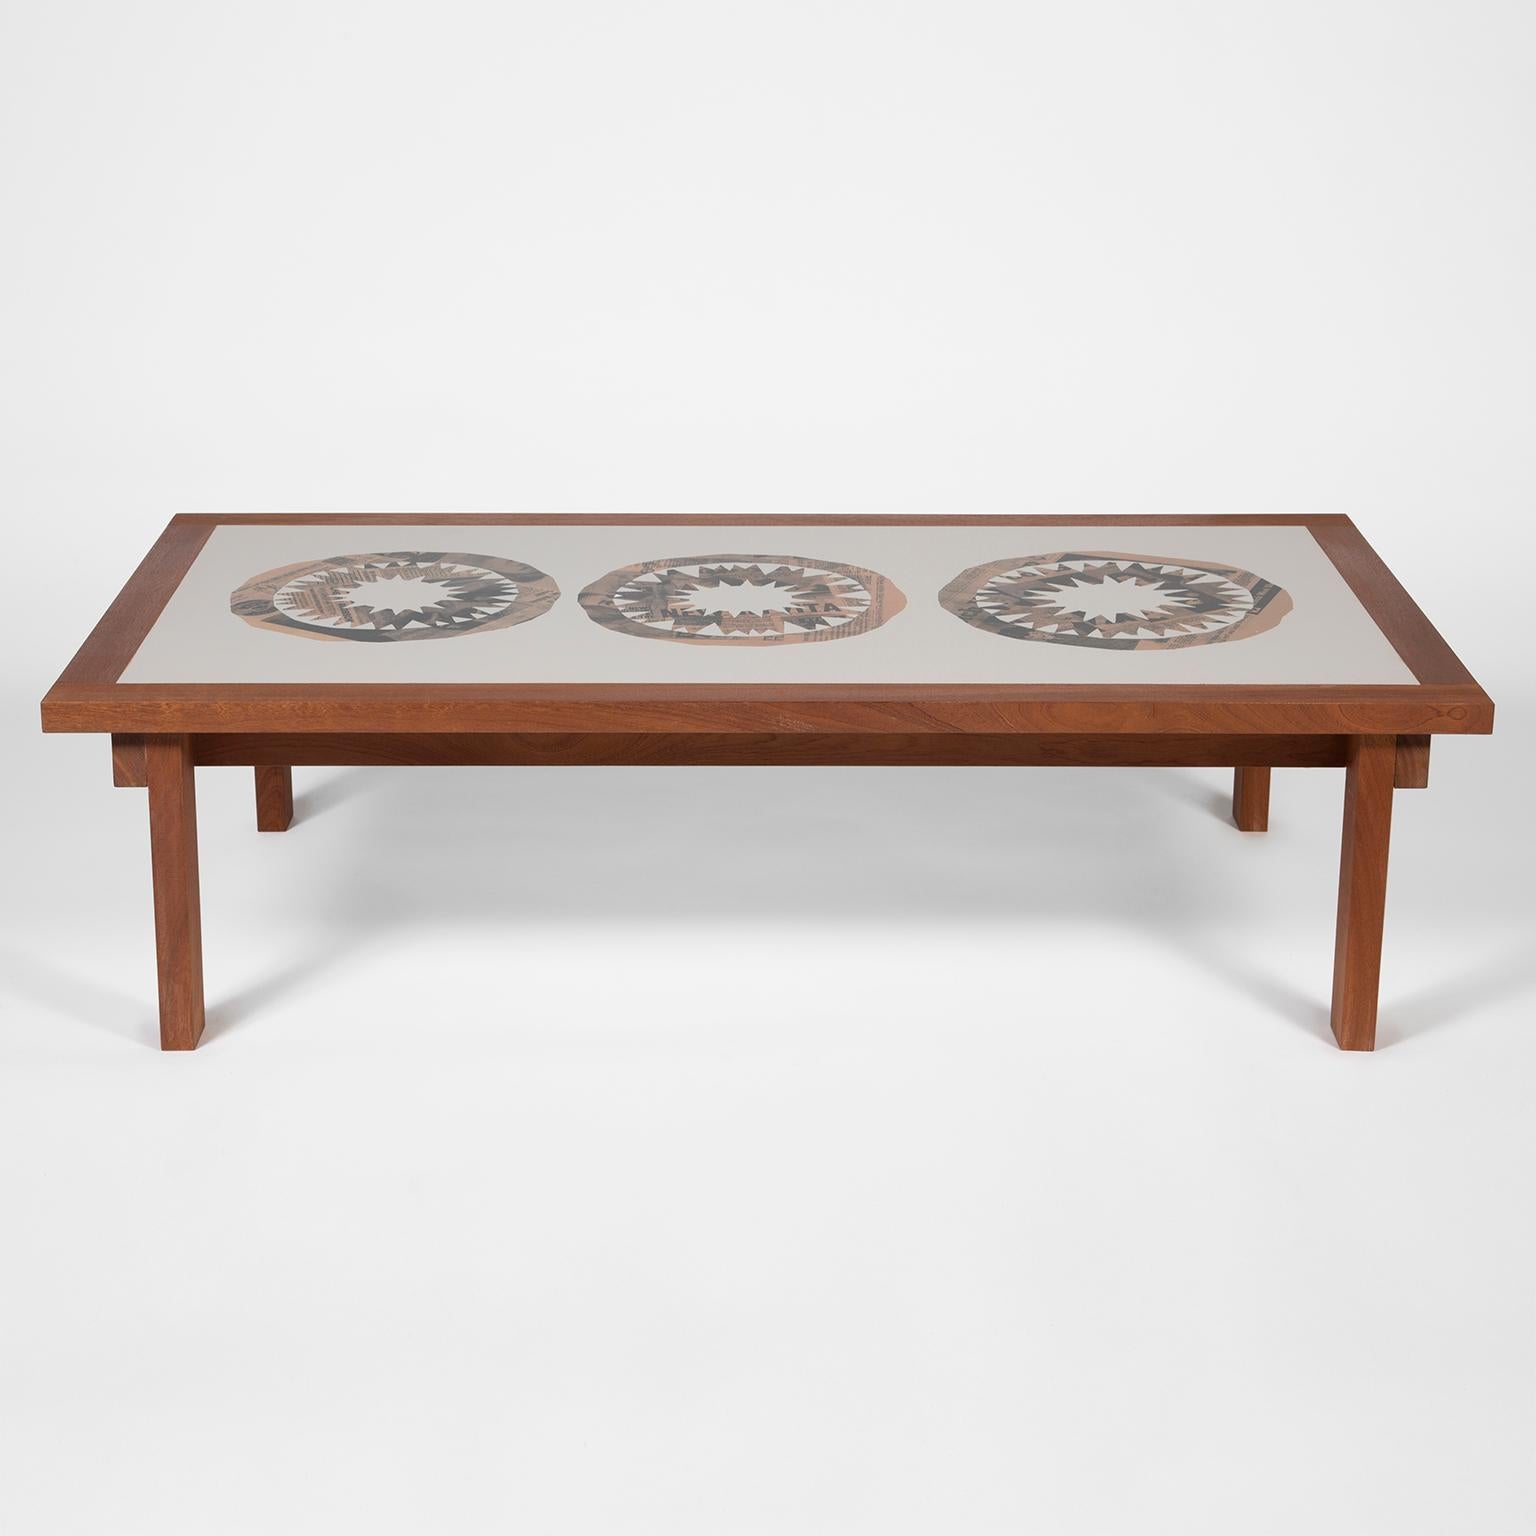 Hand-Crafted Triple Star Table by DANAD Design 'Peter Blake', Contemporary For Sale